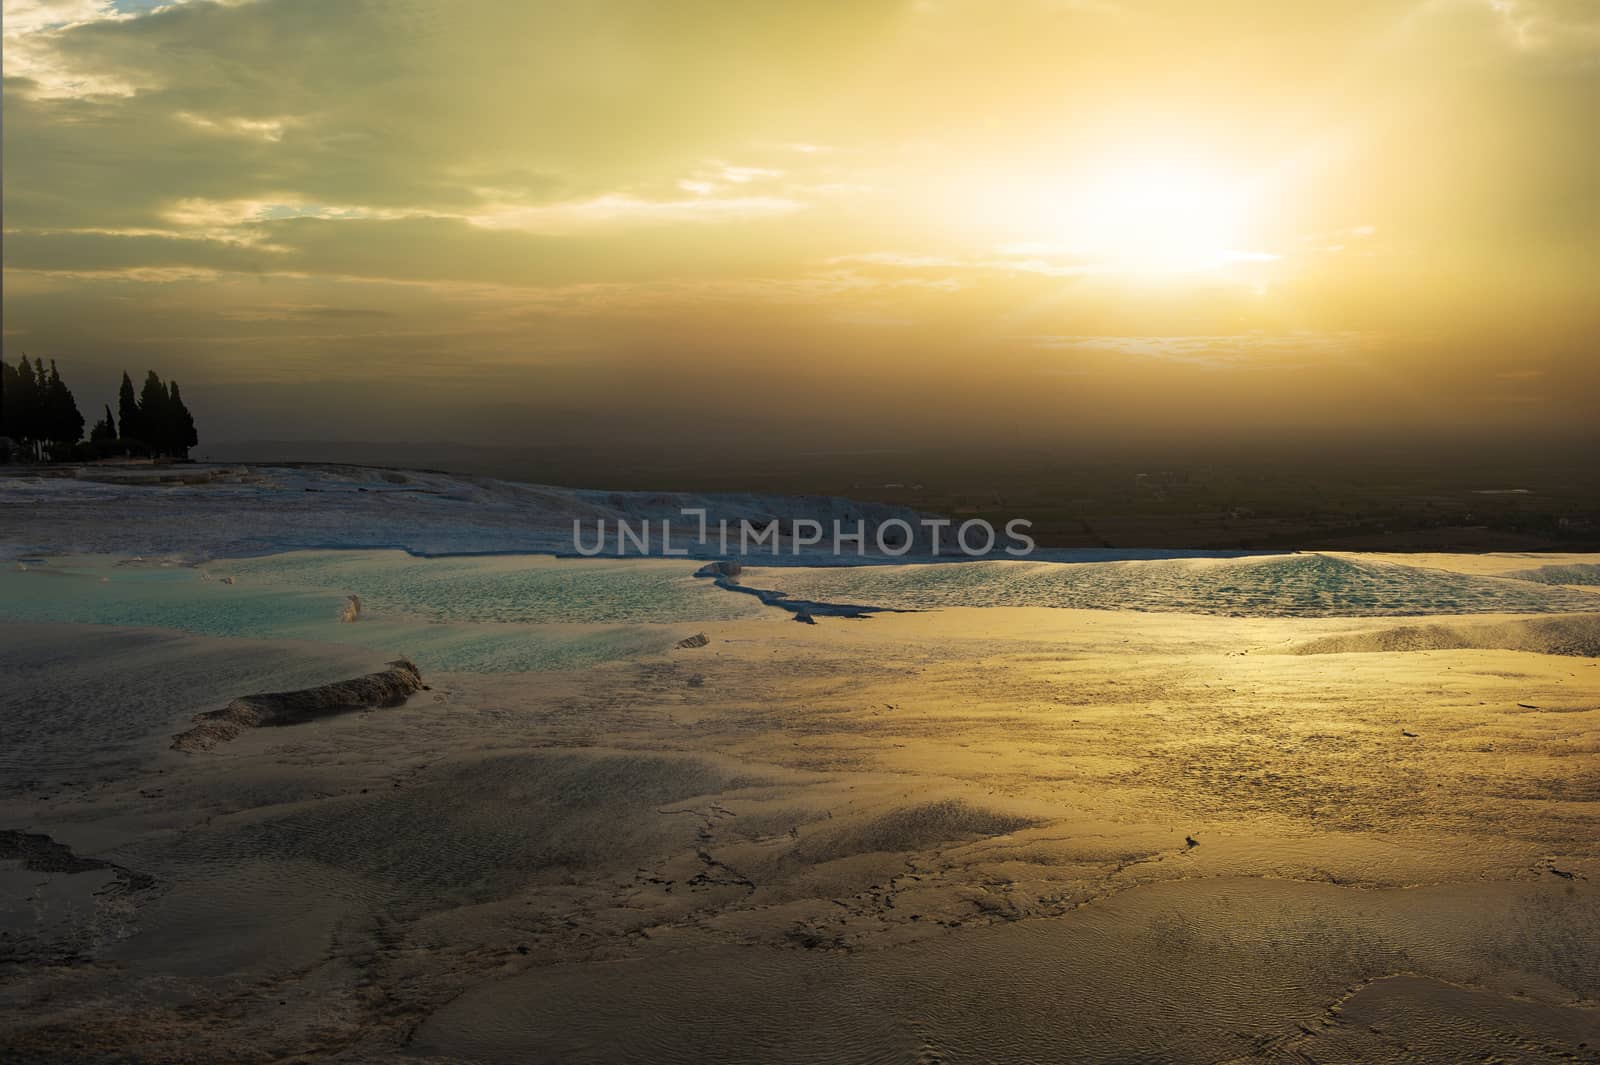 Sunset at Pamukkale in Turkey by fyletto